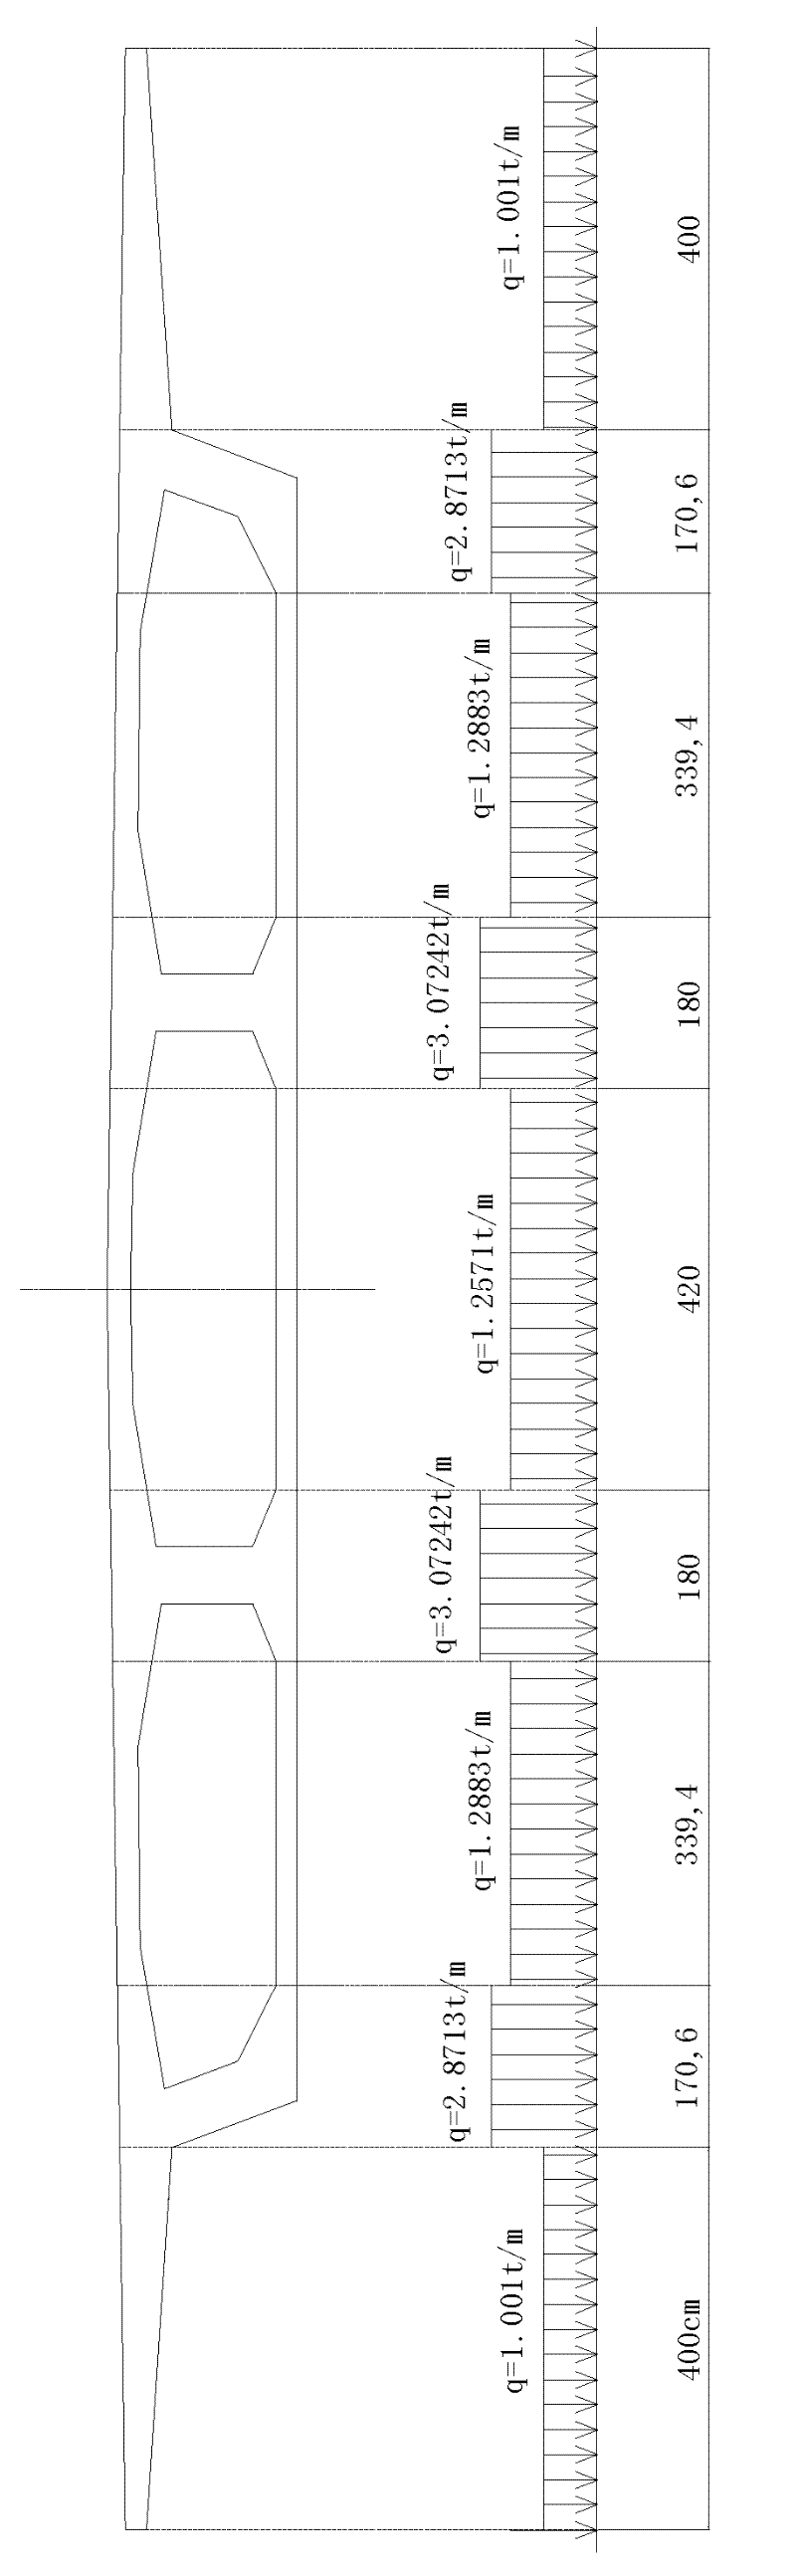 Method for carrying out load test on bridge support frame by prefabricated parts moved through tractive walking